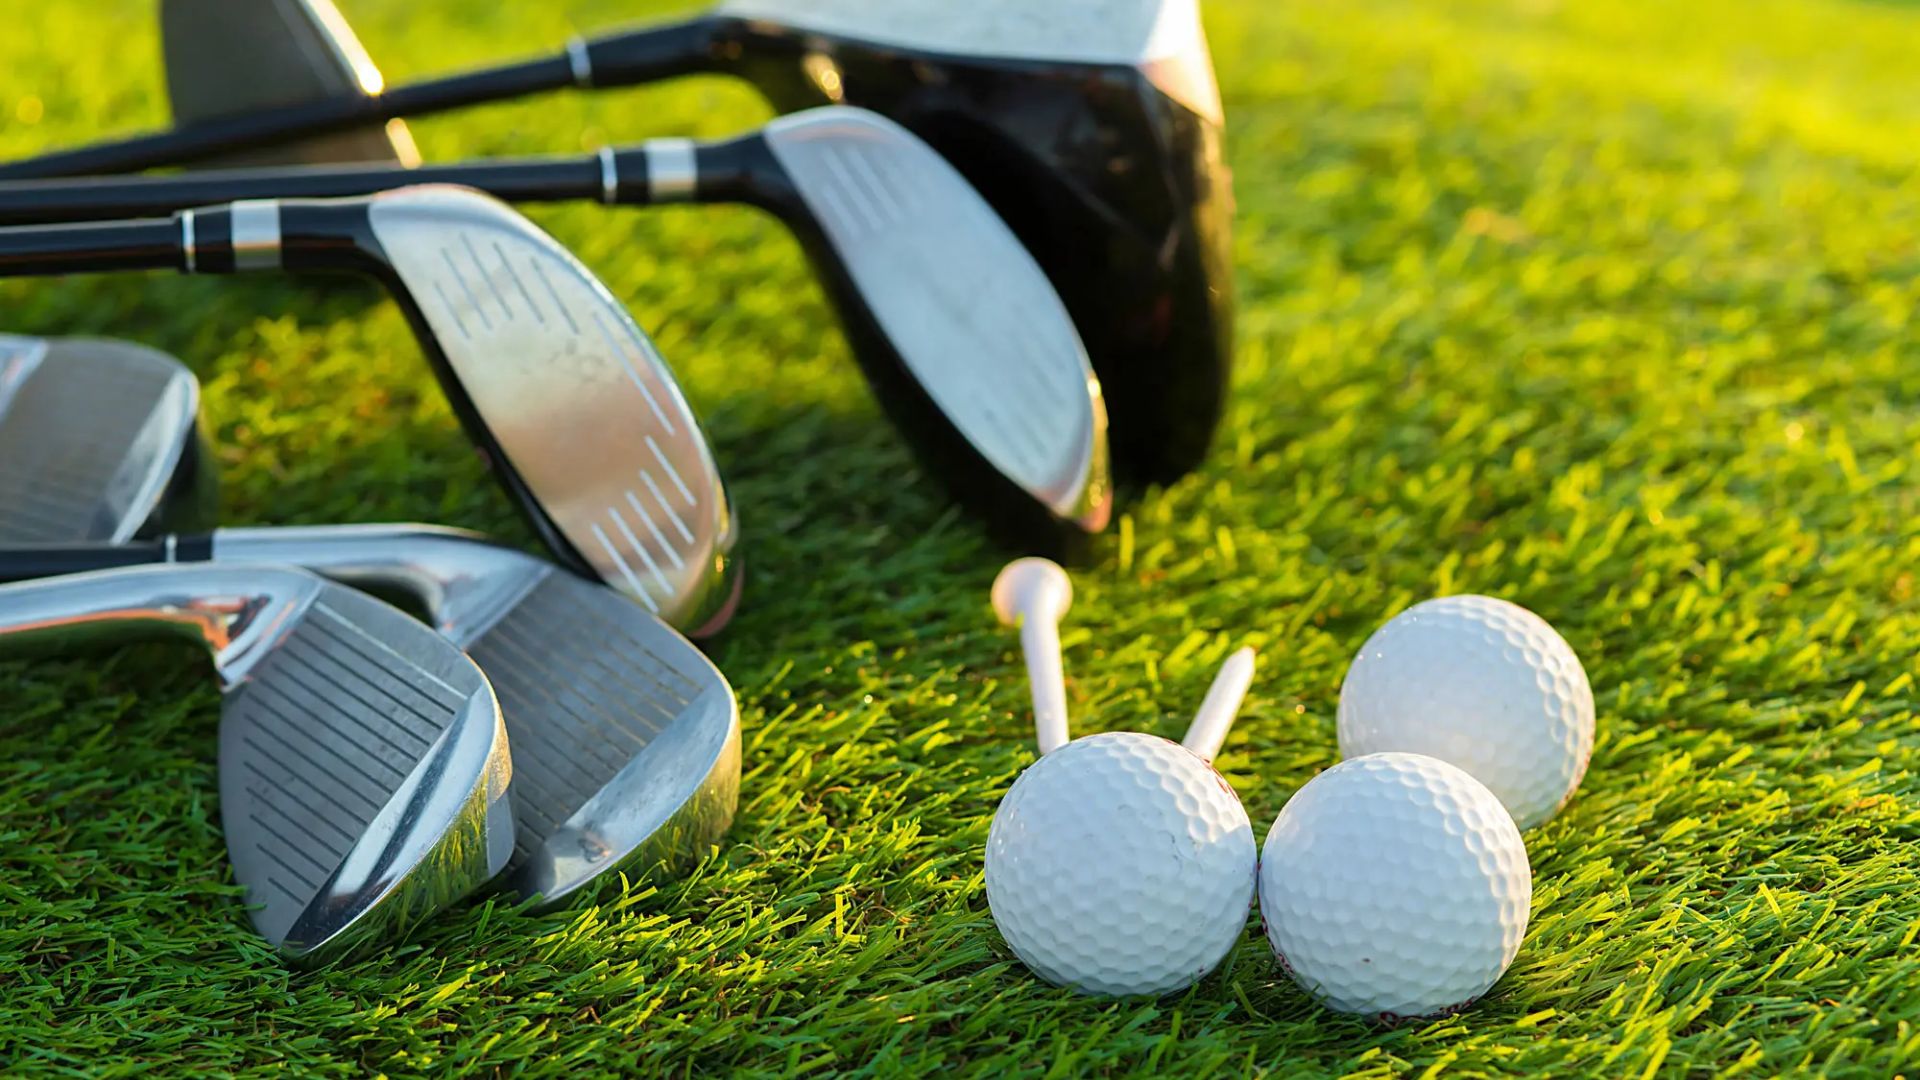 10 Essential Features to Look for in Your Next Golf Club Set